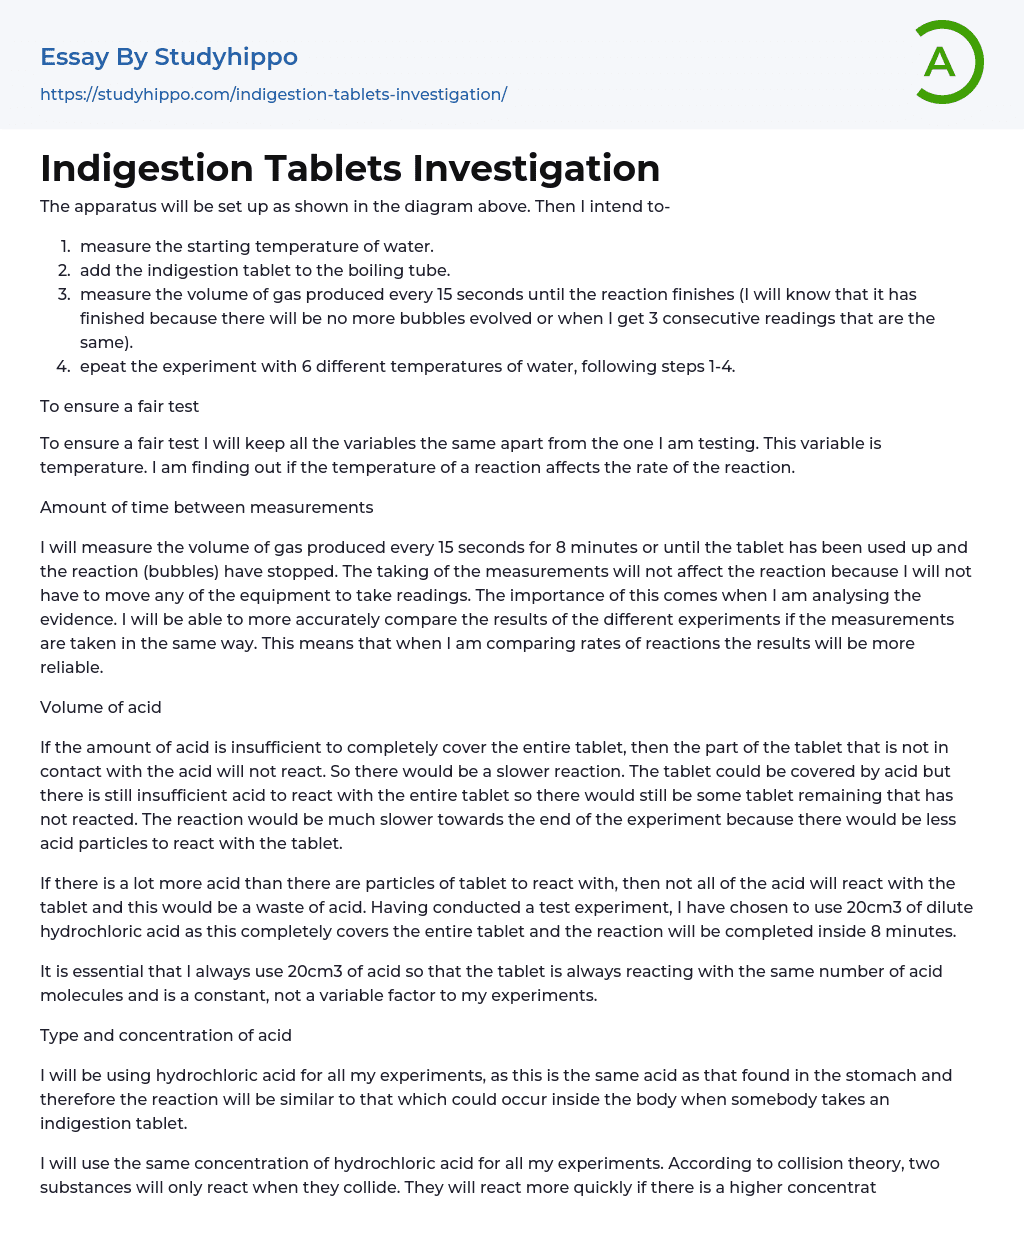 Indigestion Tablets Investigation Essay Example